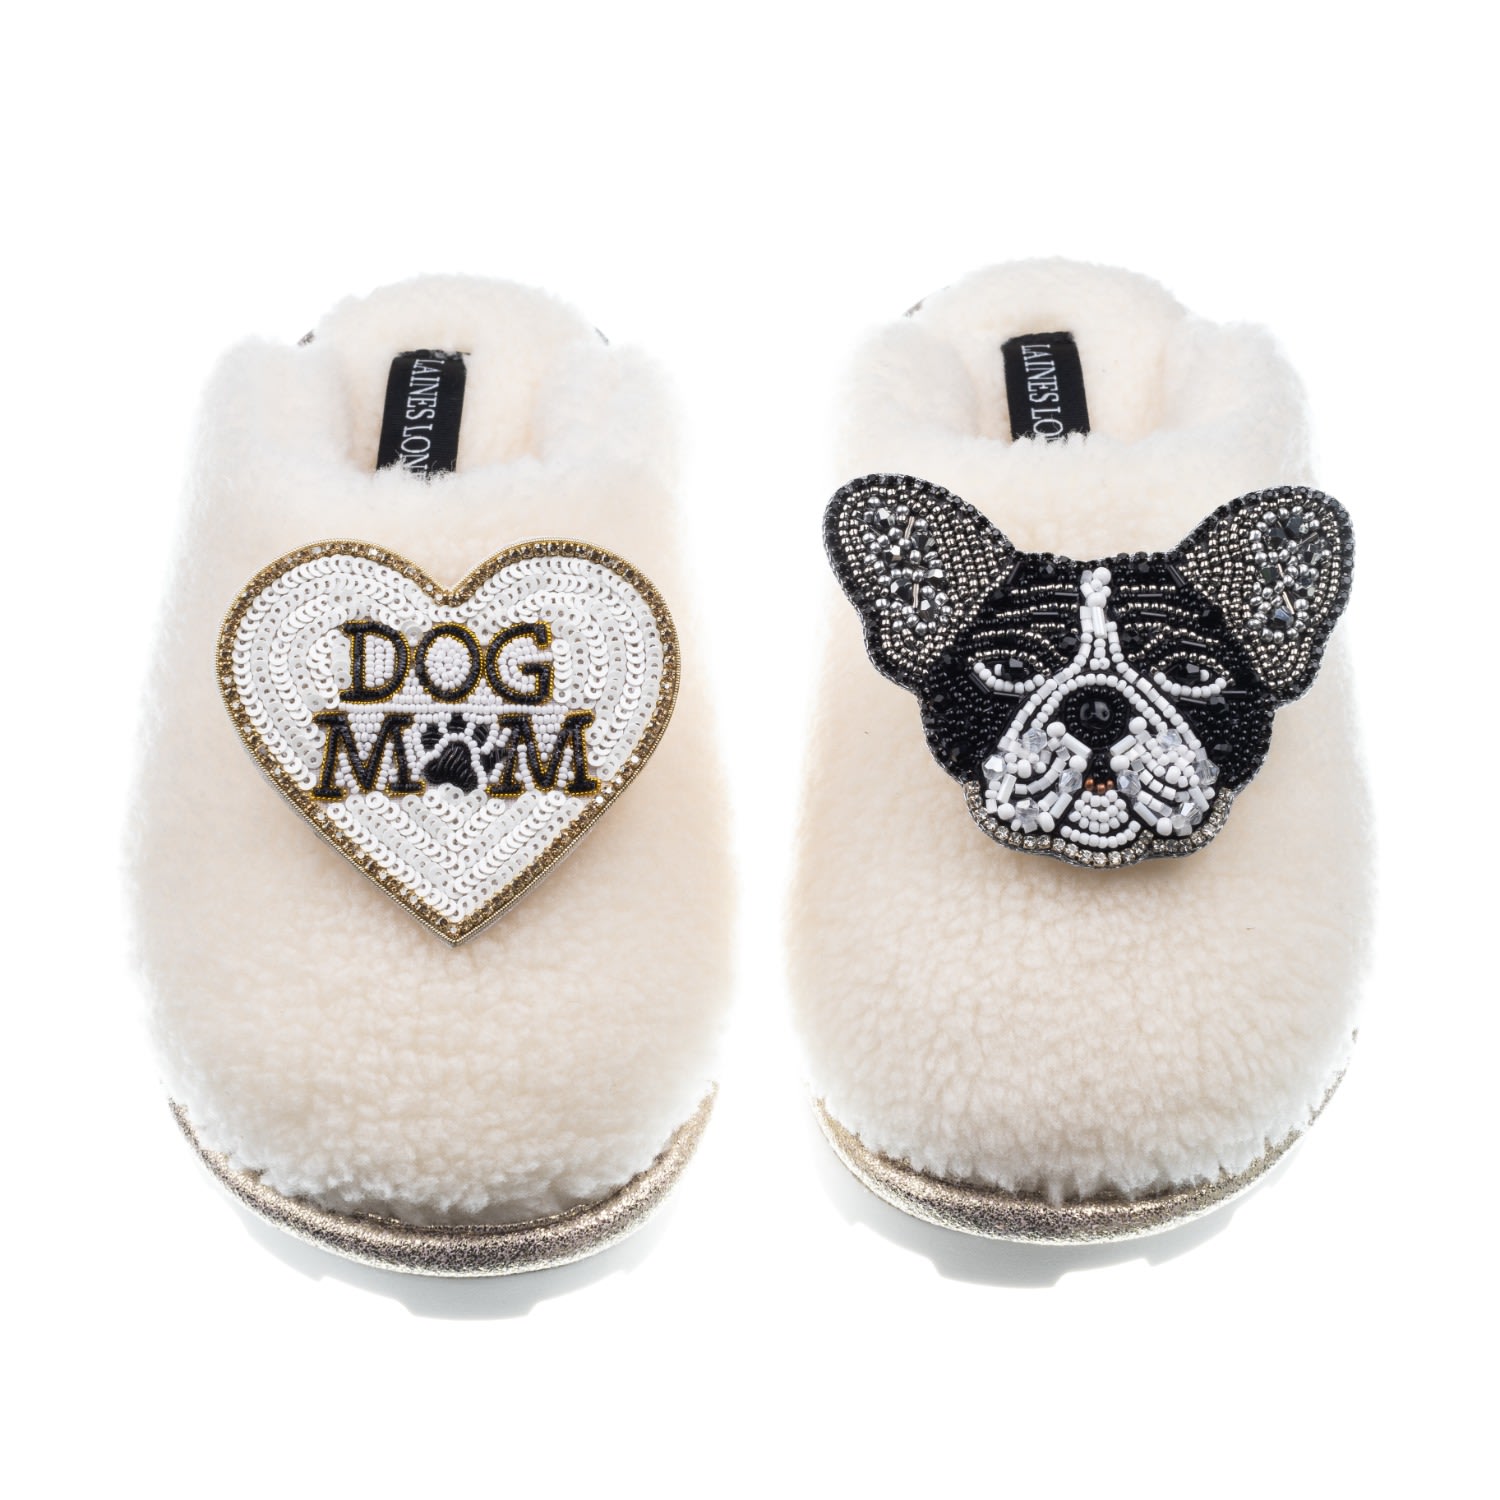 Laines London Women's White Teddy Closed Toe Slippers With Coco The Frenchie & Dog Mum / Mom Brooches - Cream In Neutral